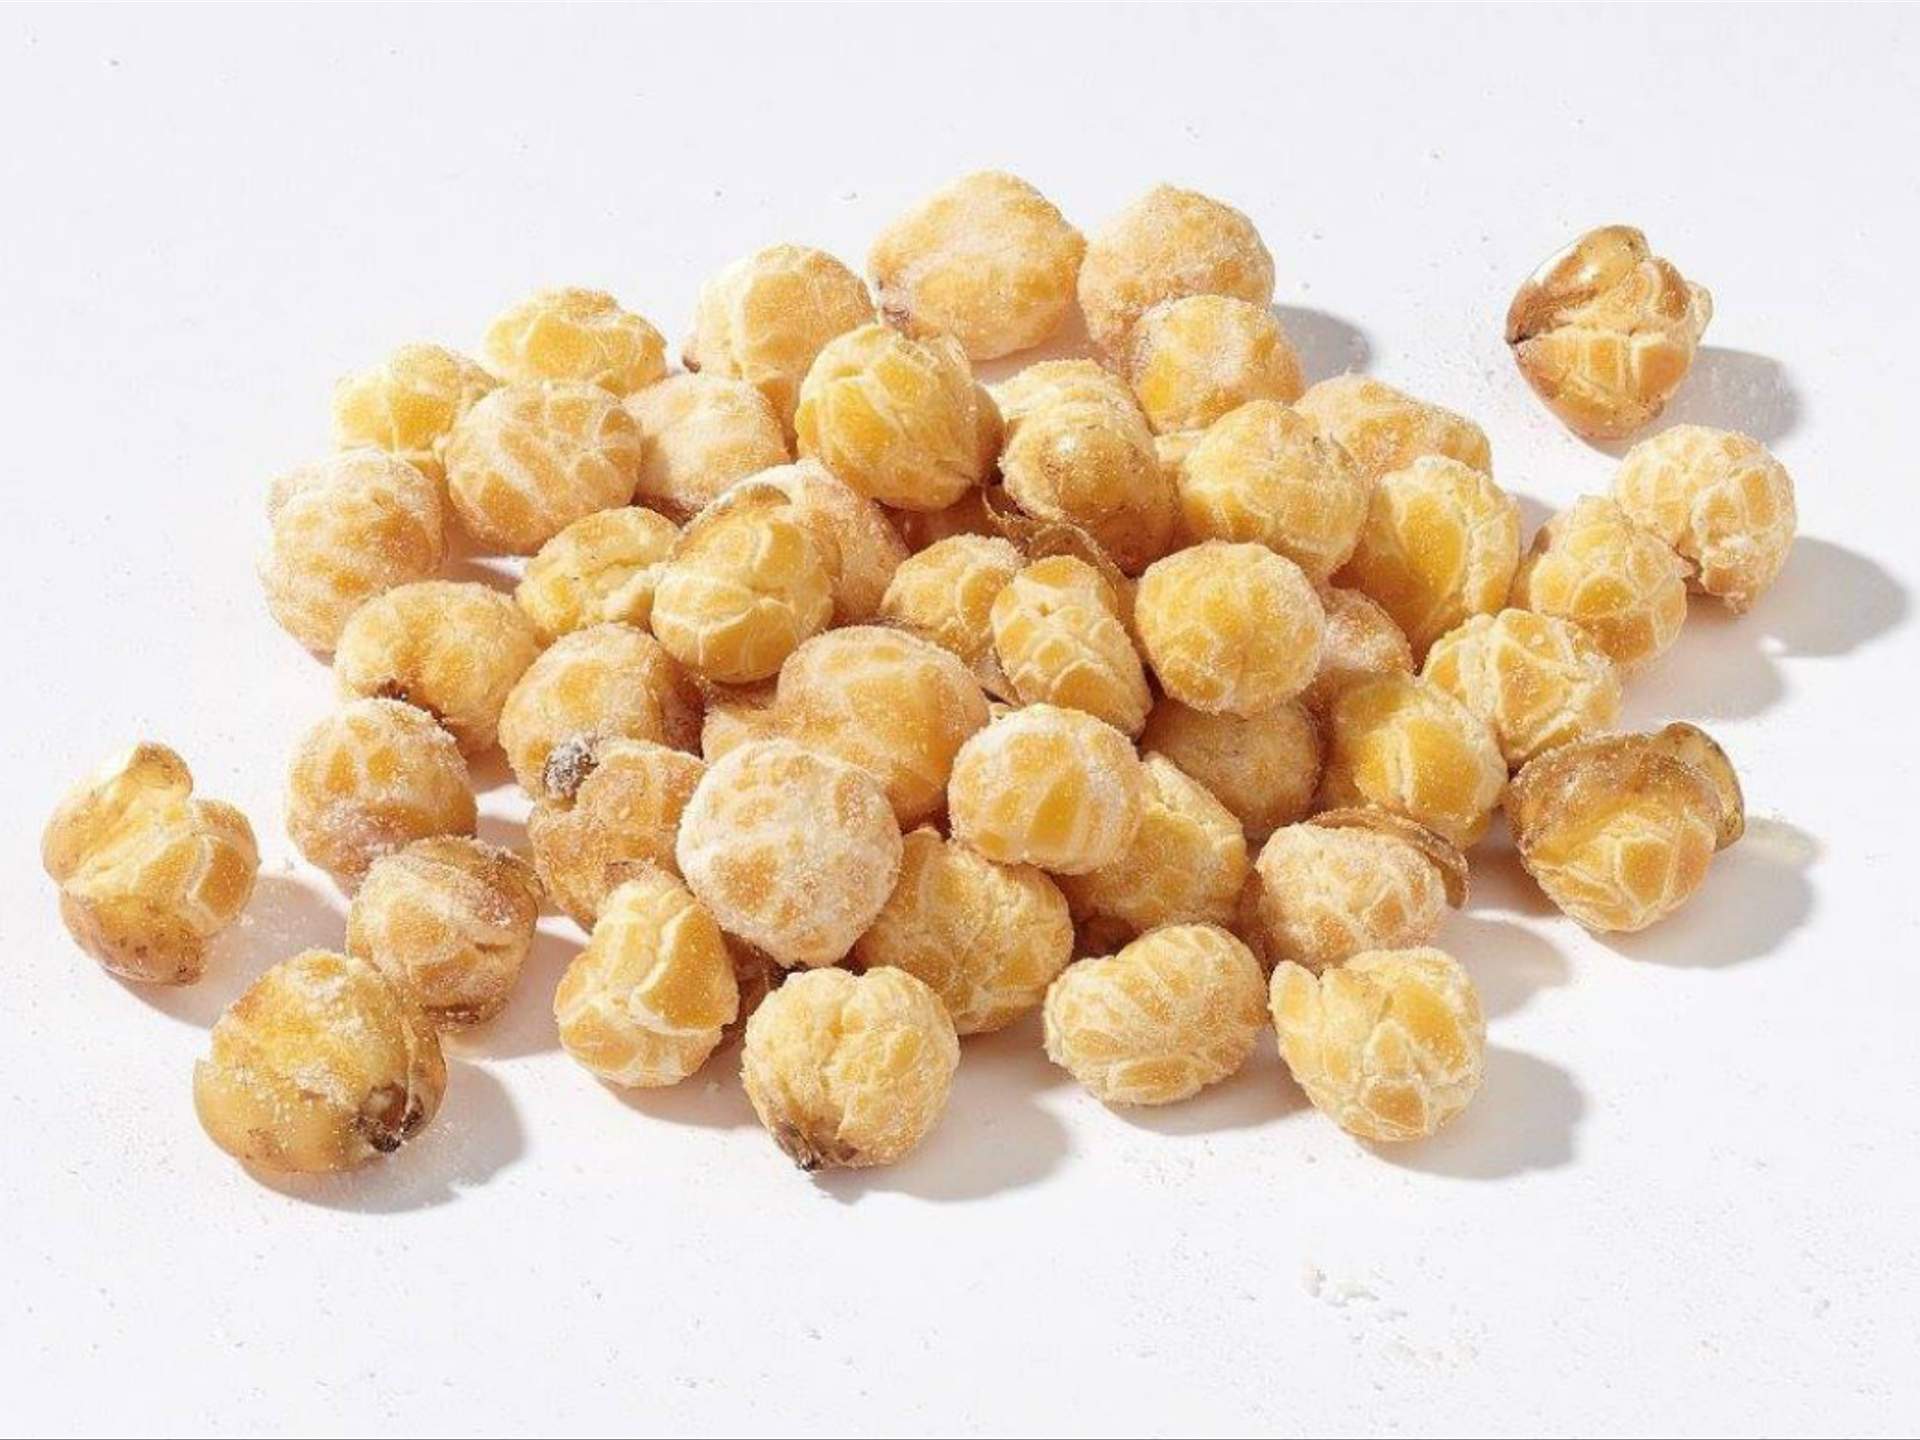 Half-Popped Corn Is Newest American Snack Food Trend - Concrete Playground